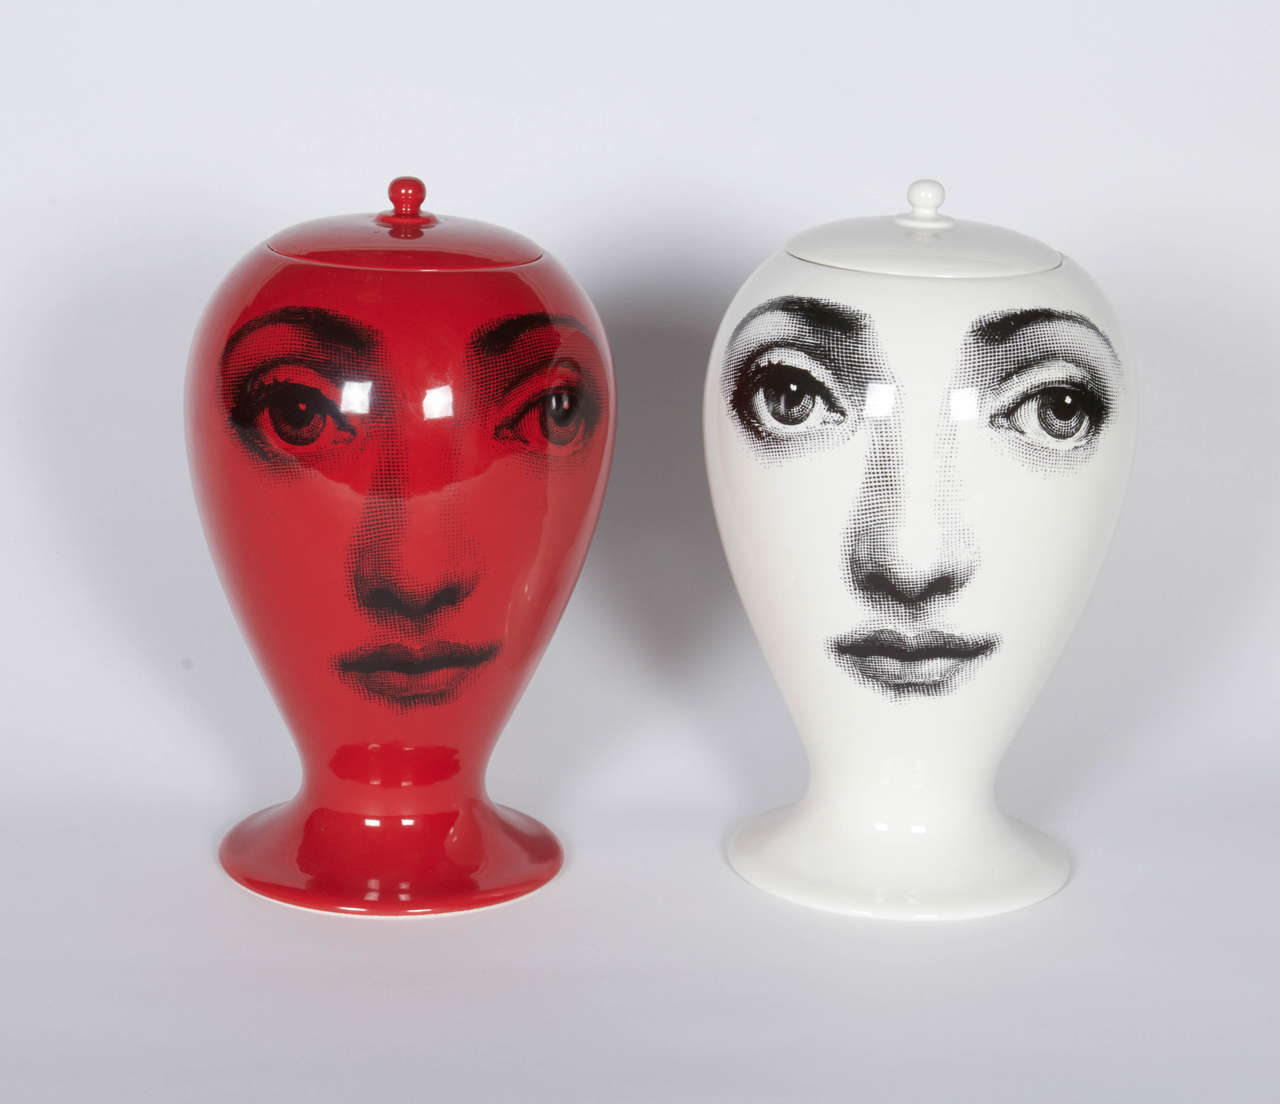 The pair of vases incorporates the face of soprano Lina Cavalieri whose face was featured more than 11,000 works of Piero Fornasetti. The facial features slightly distorted on the convex surface presents the whimsical nature of Fornasetti's oeuvre.